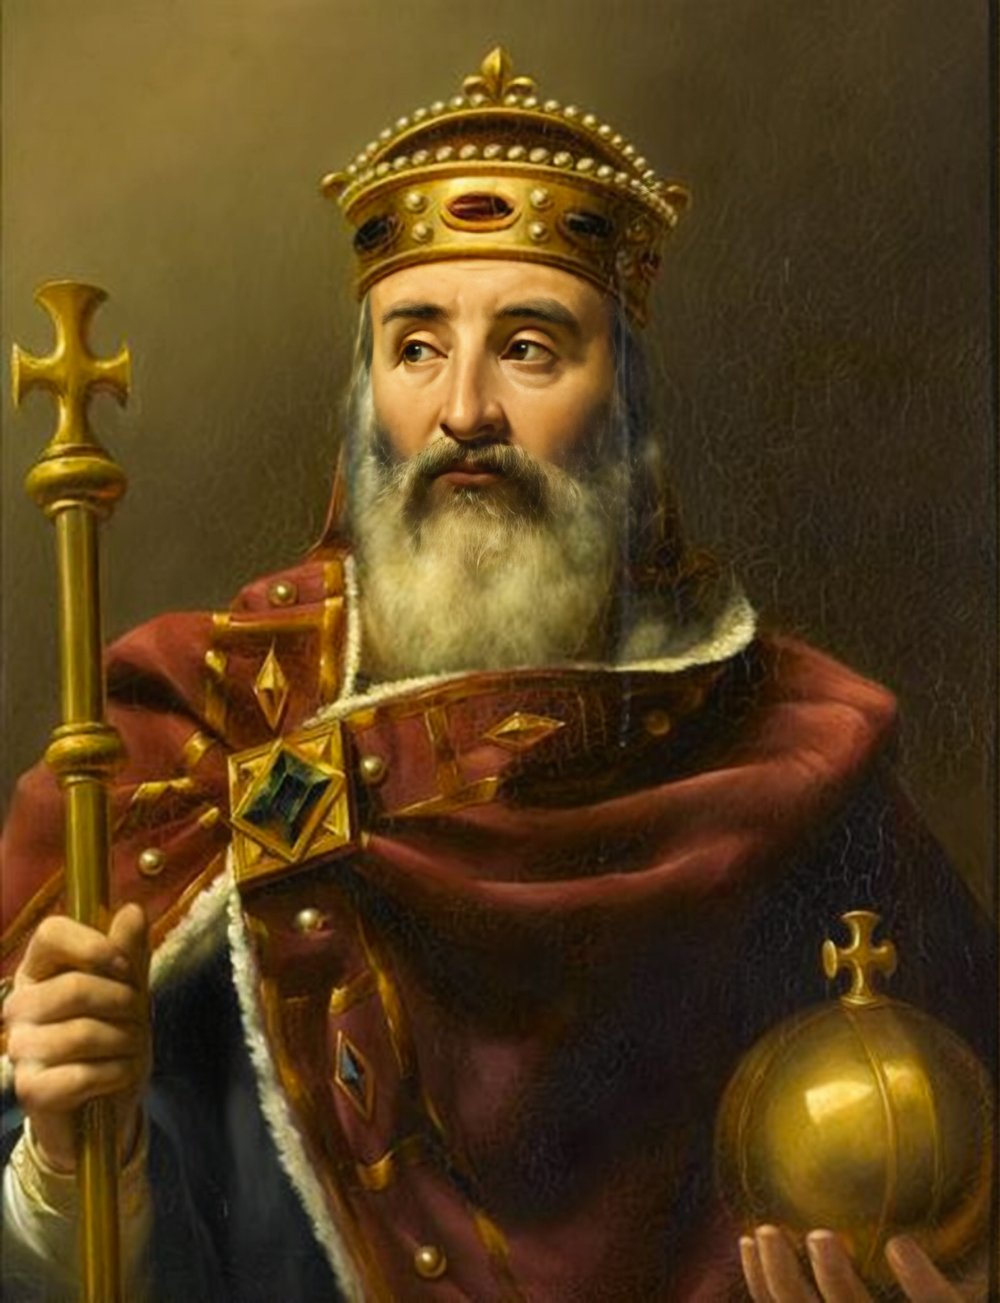 Portrait of Charlemagne, Emperor of the West, wearing a golden crown and royal regalia, holding a scepter and an orb, with a contemplative expression on his face against a dark background.